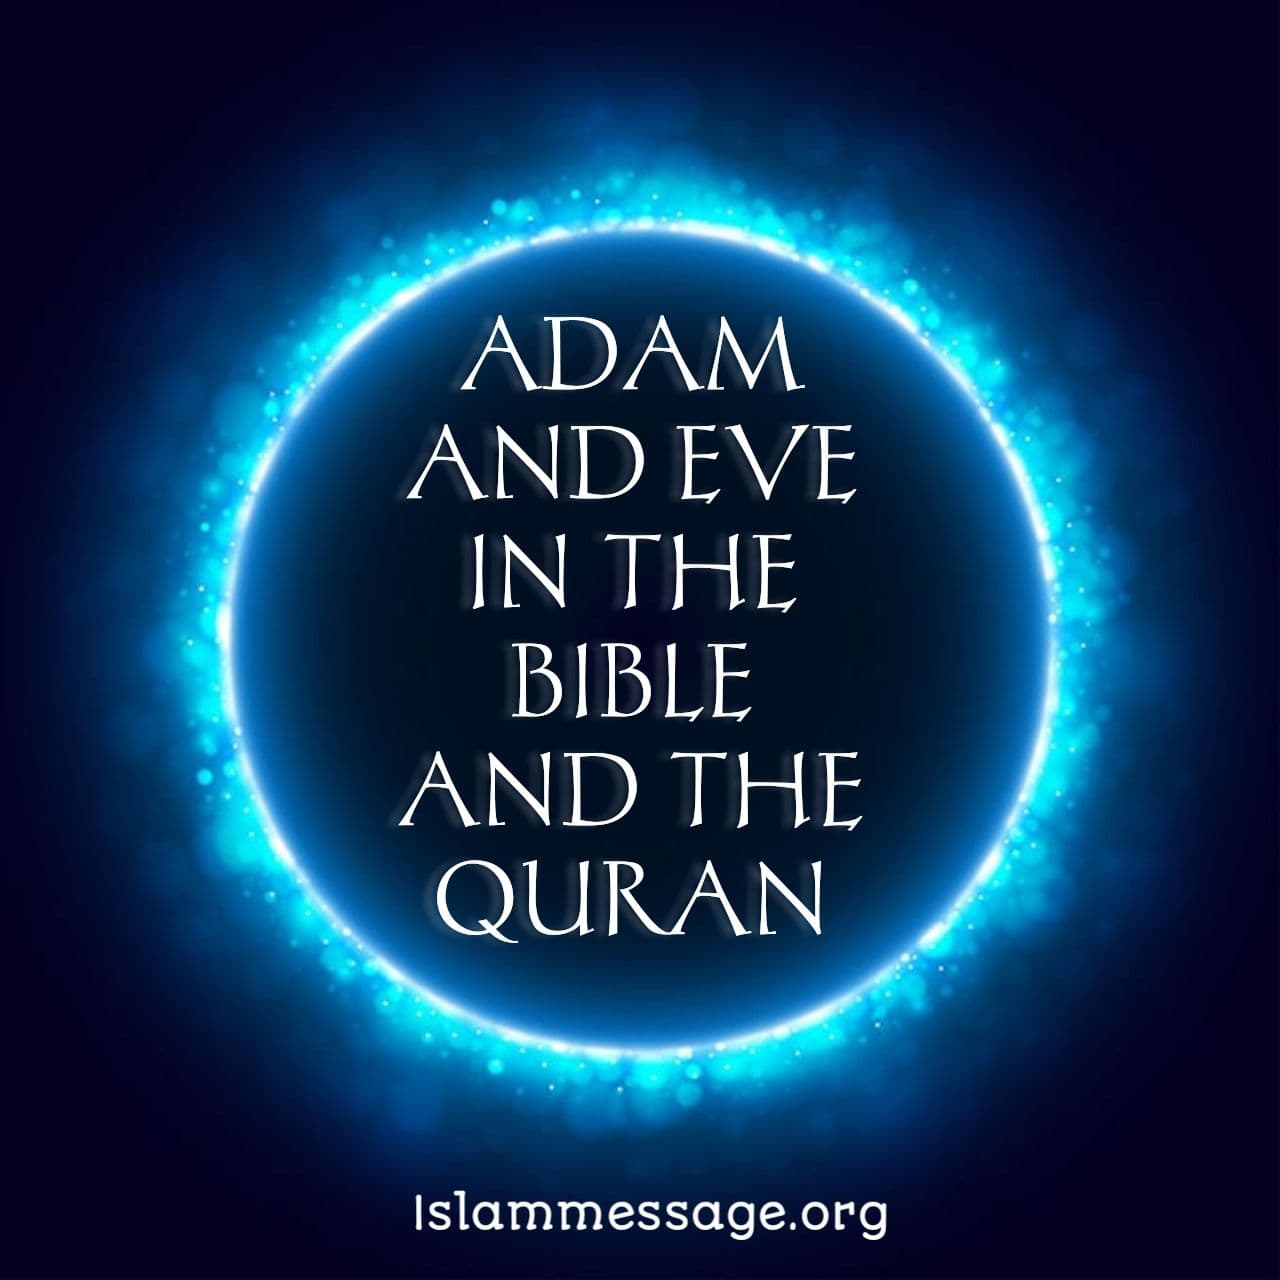 Adam and Eve in the Bible and the Quran